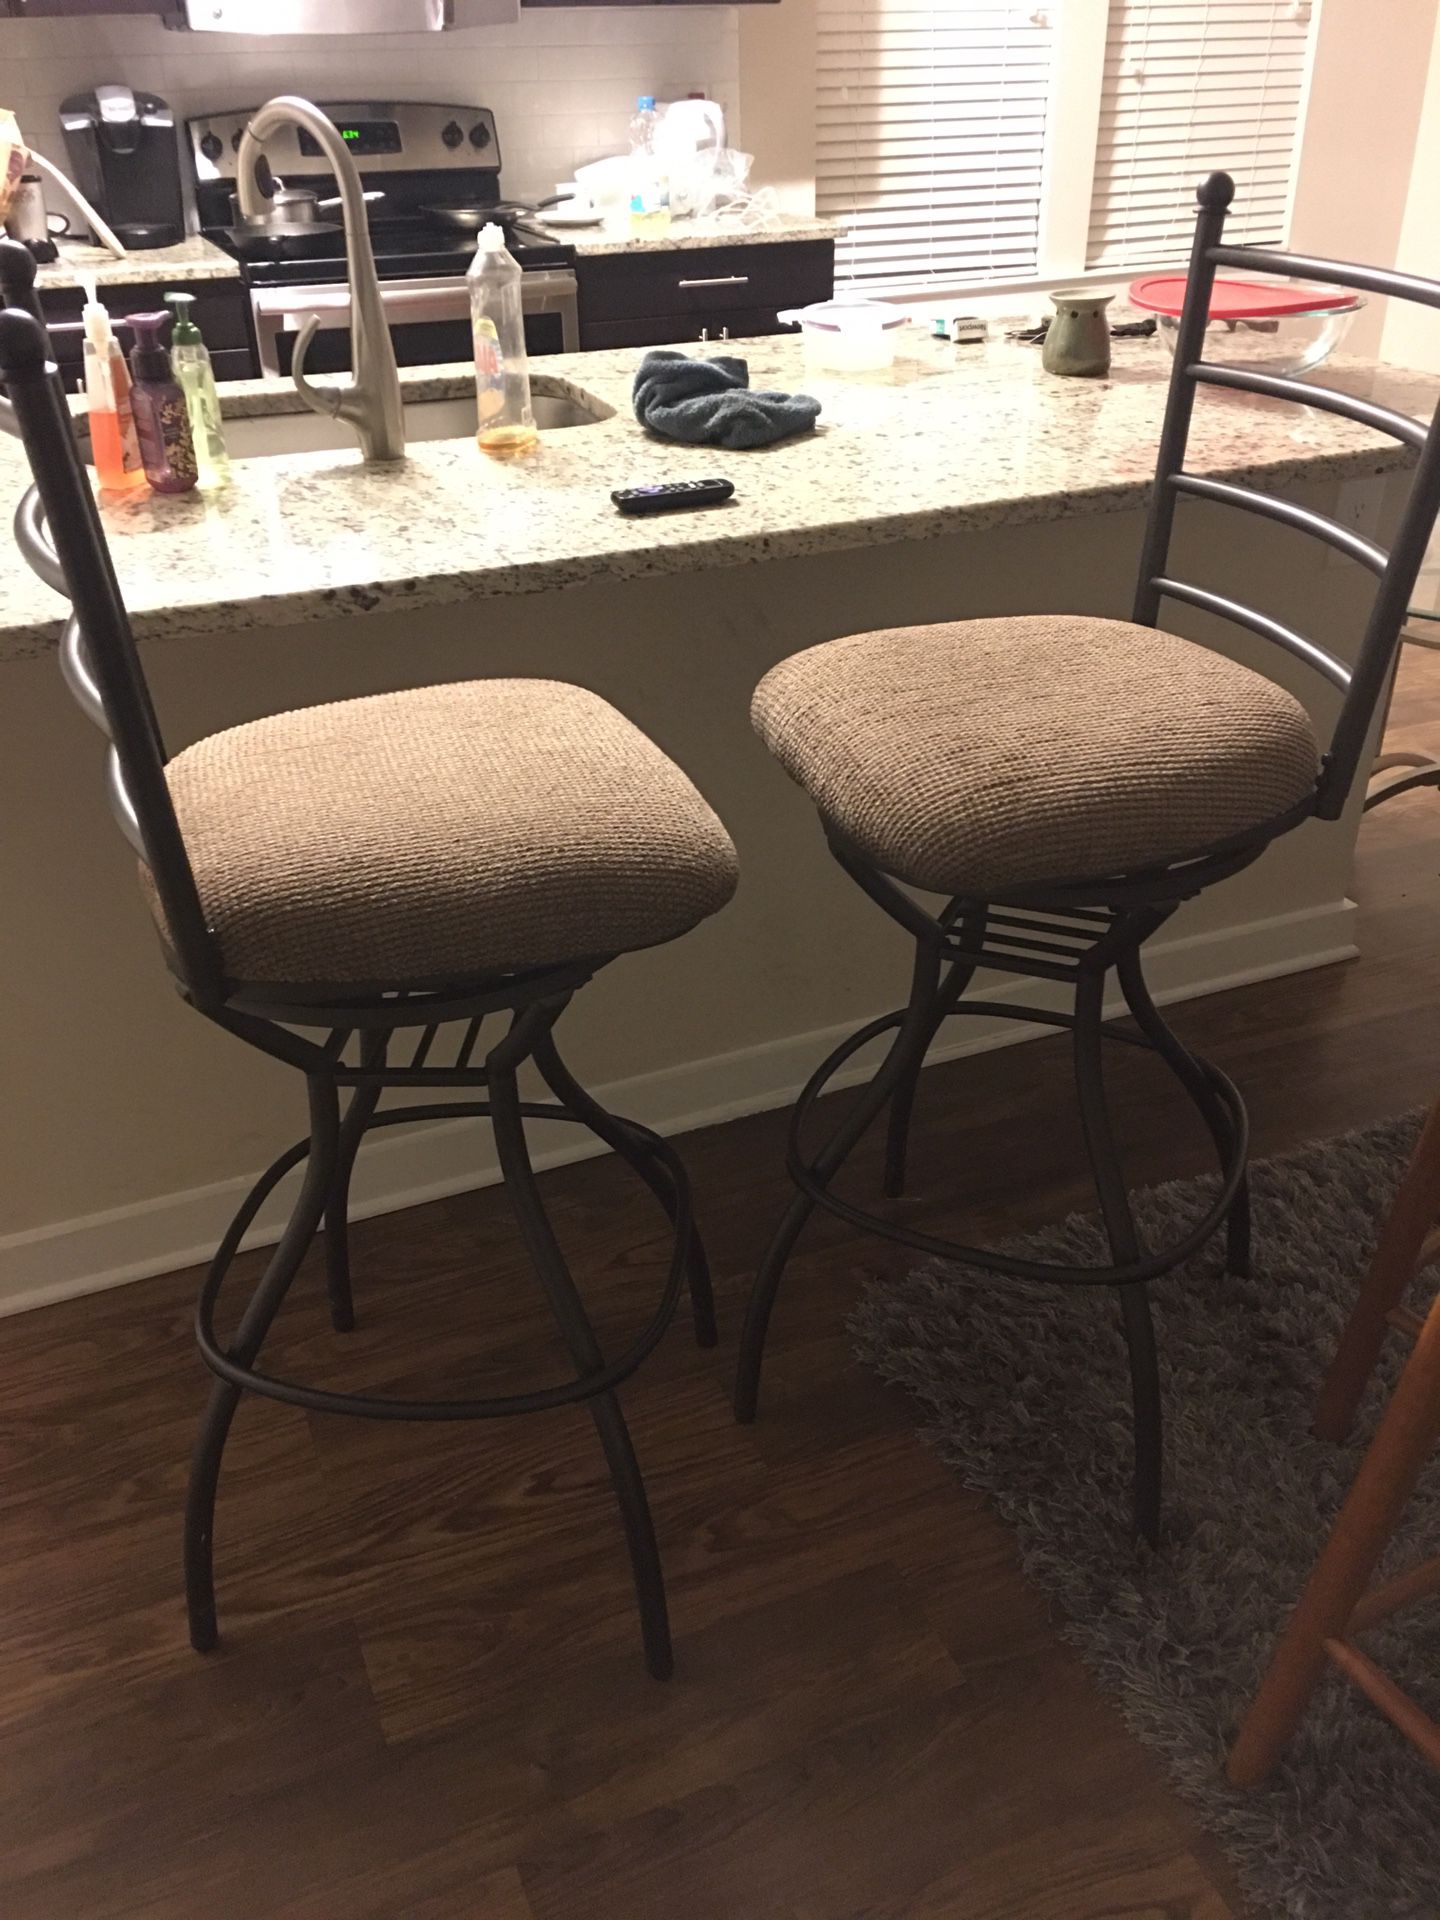 Excellent condition kitchen/ bar chairs. Very comfortable